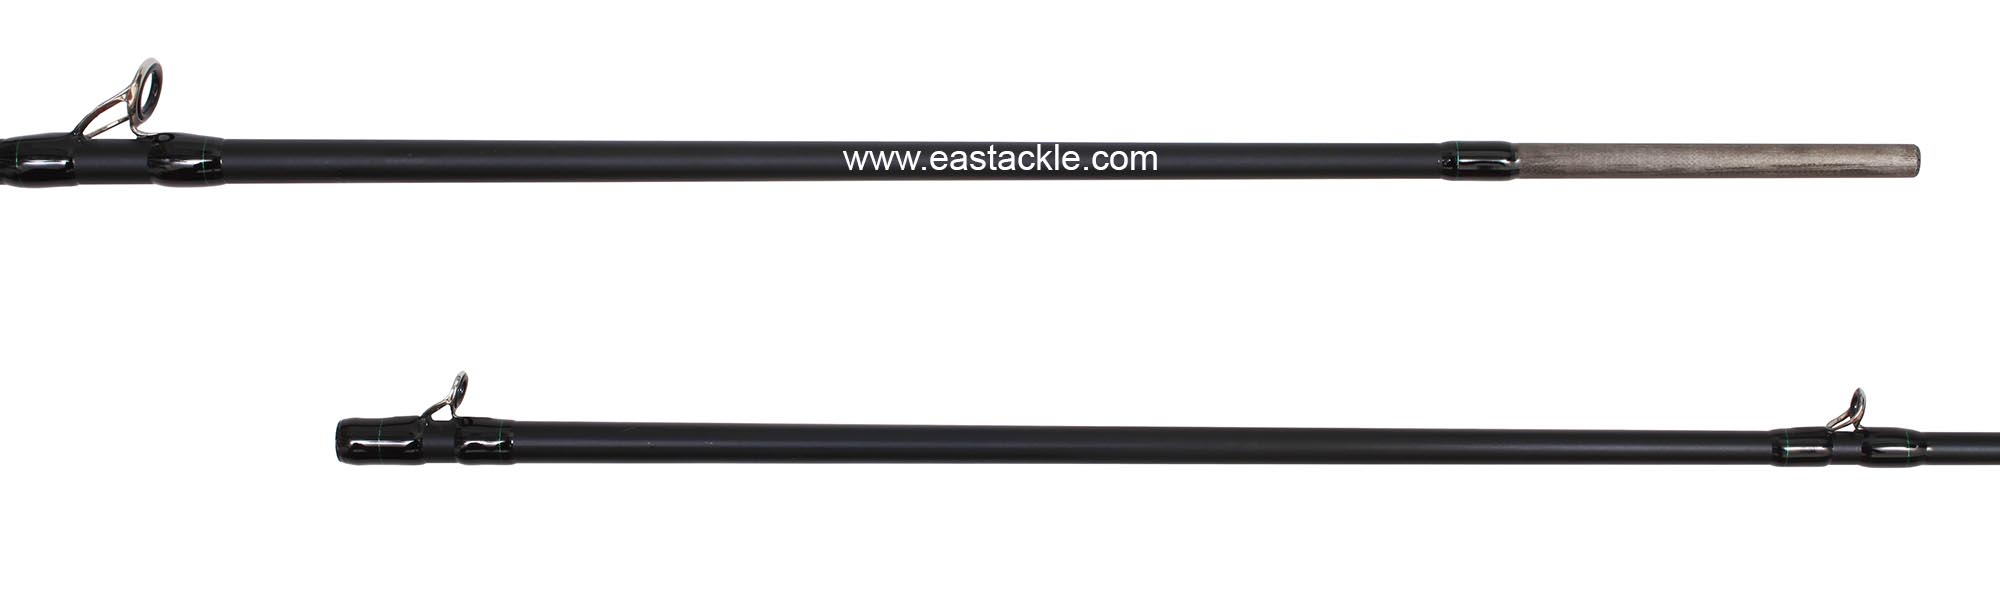 Rapala - Koivu - KVC652M - Bait Casting Rod - Joint Section (Side View) | Eastackle